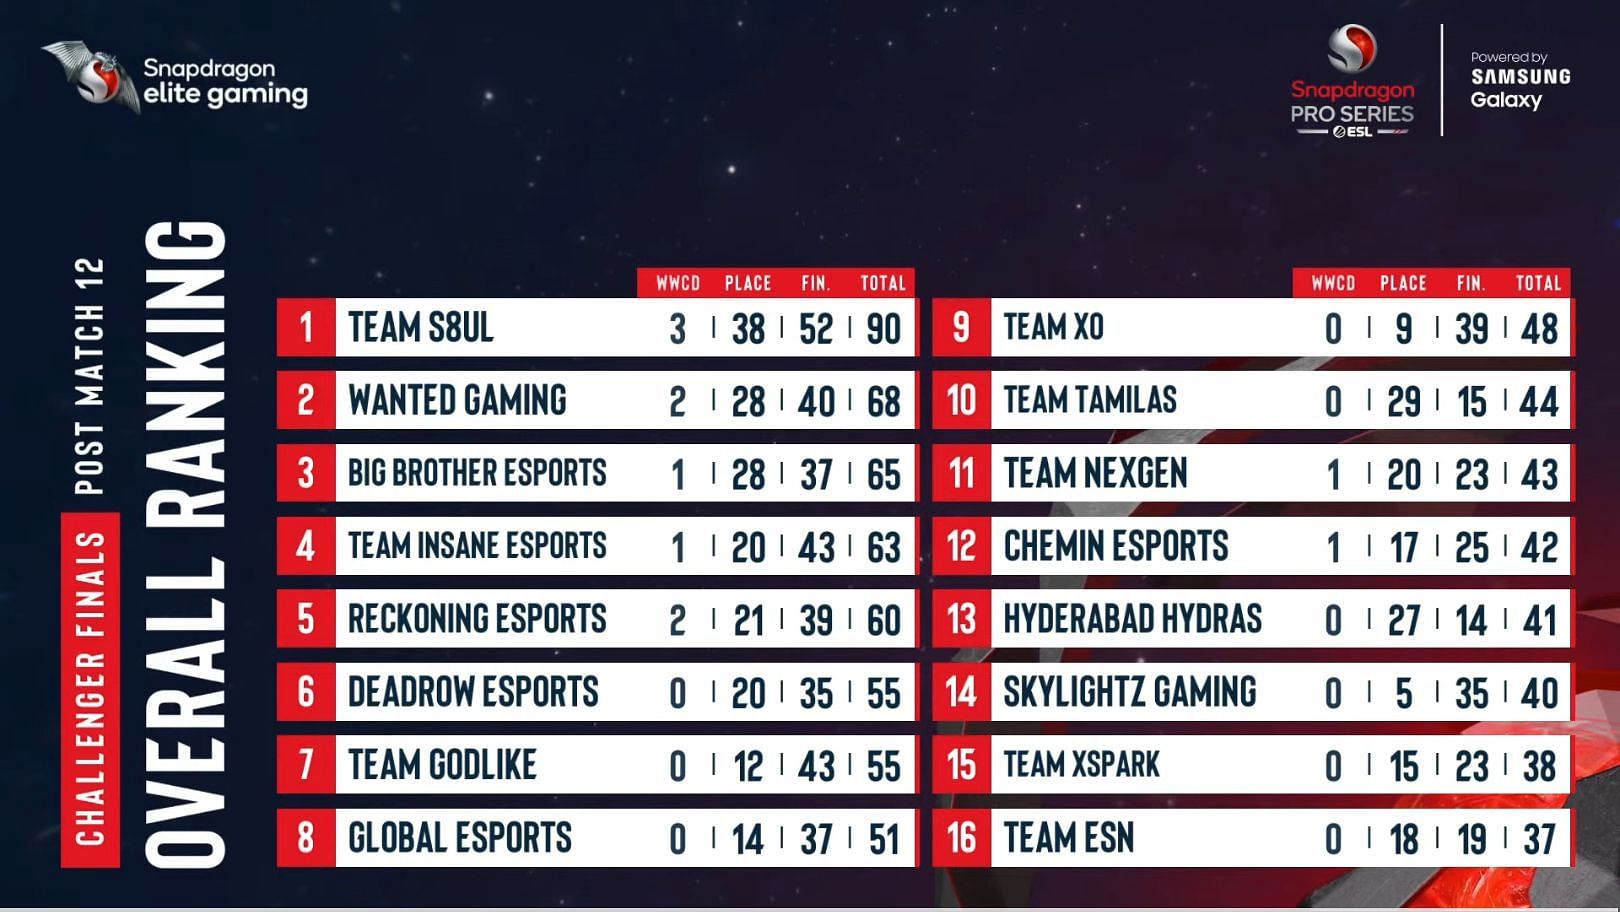 Team XSpark and ESN barely qualified for PUBG New State Finale (Image via Nodwin Gaming)